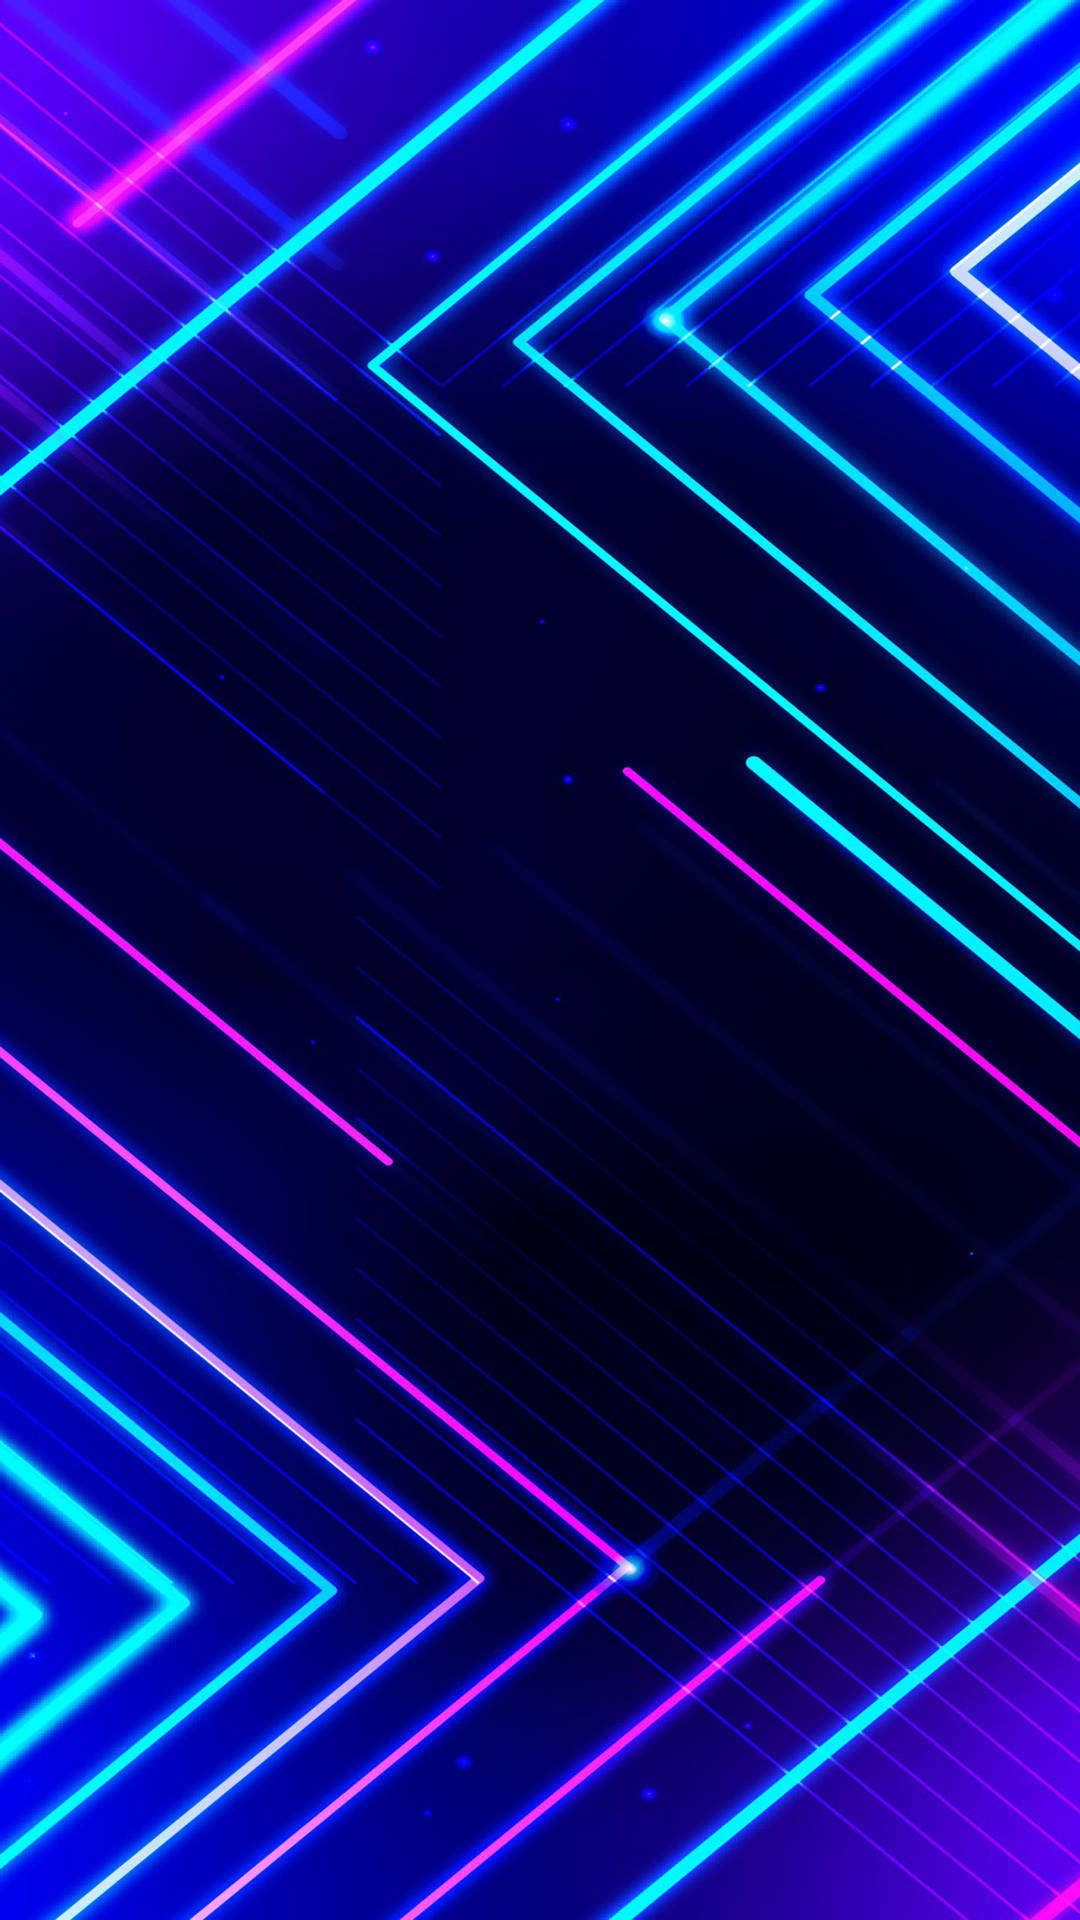 LV neon wallpaper  Neon wallpaper, Cool wallpapers for phones